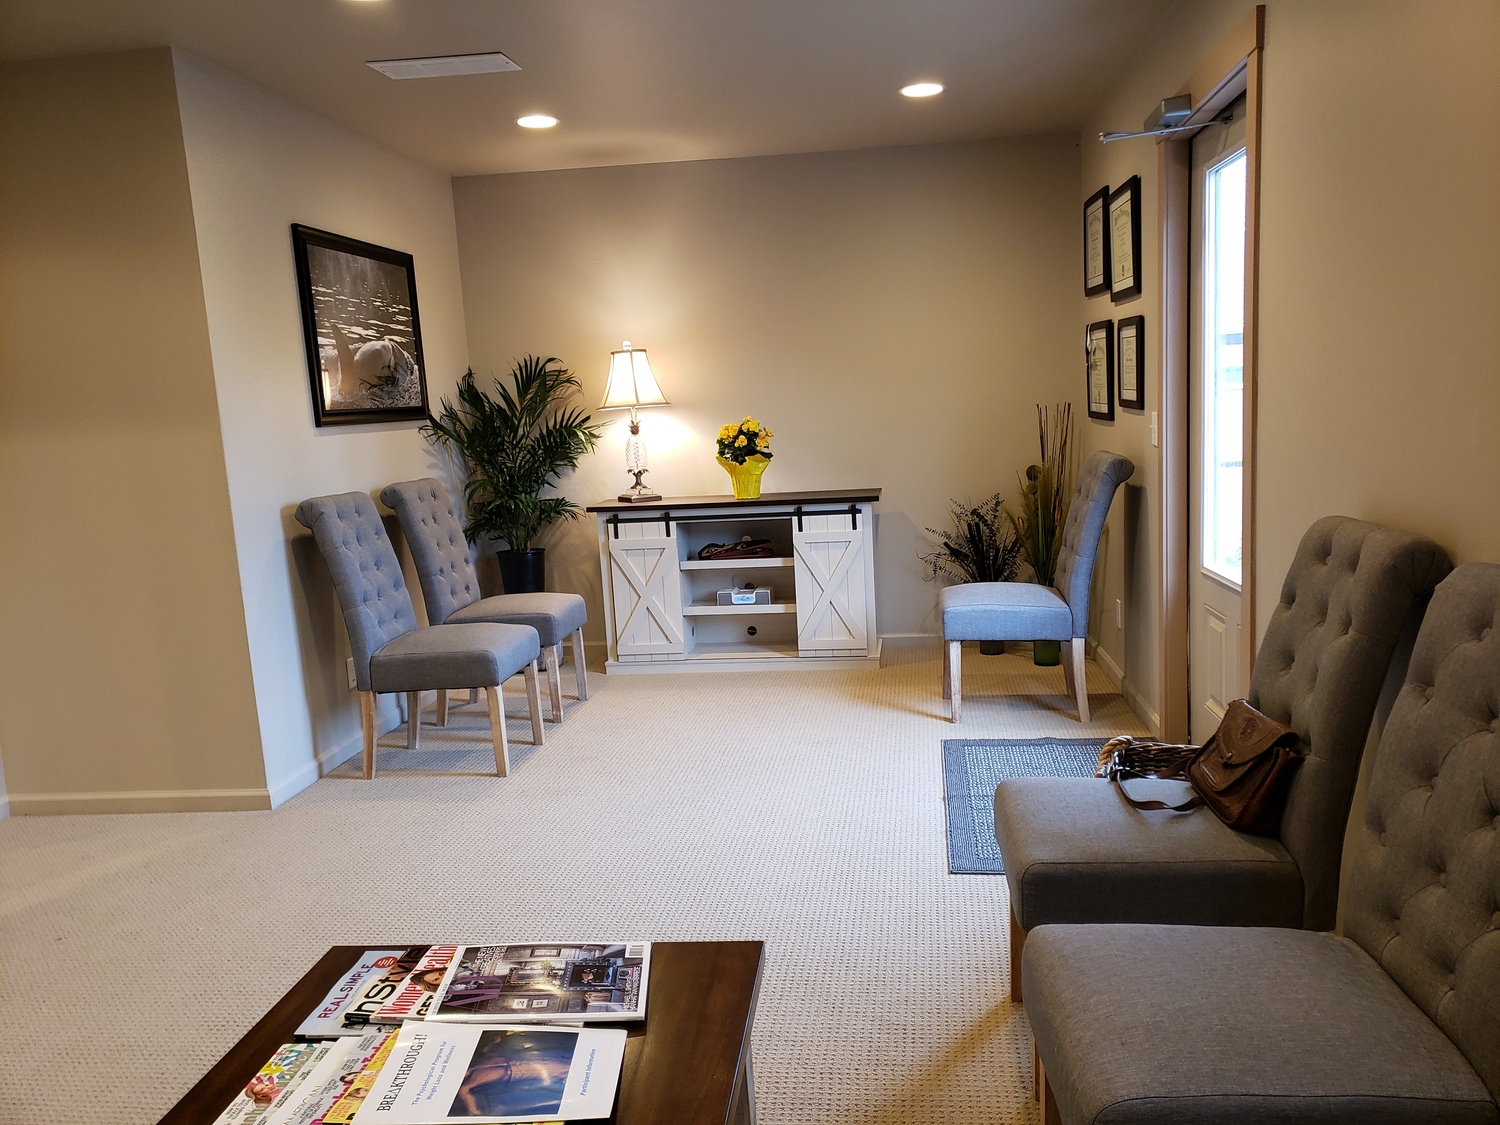 Gallery Photo of Elegant and calming waiting  area